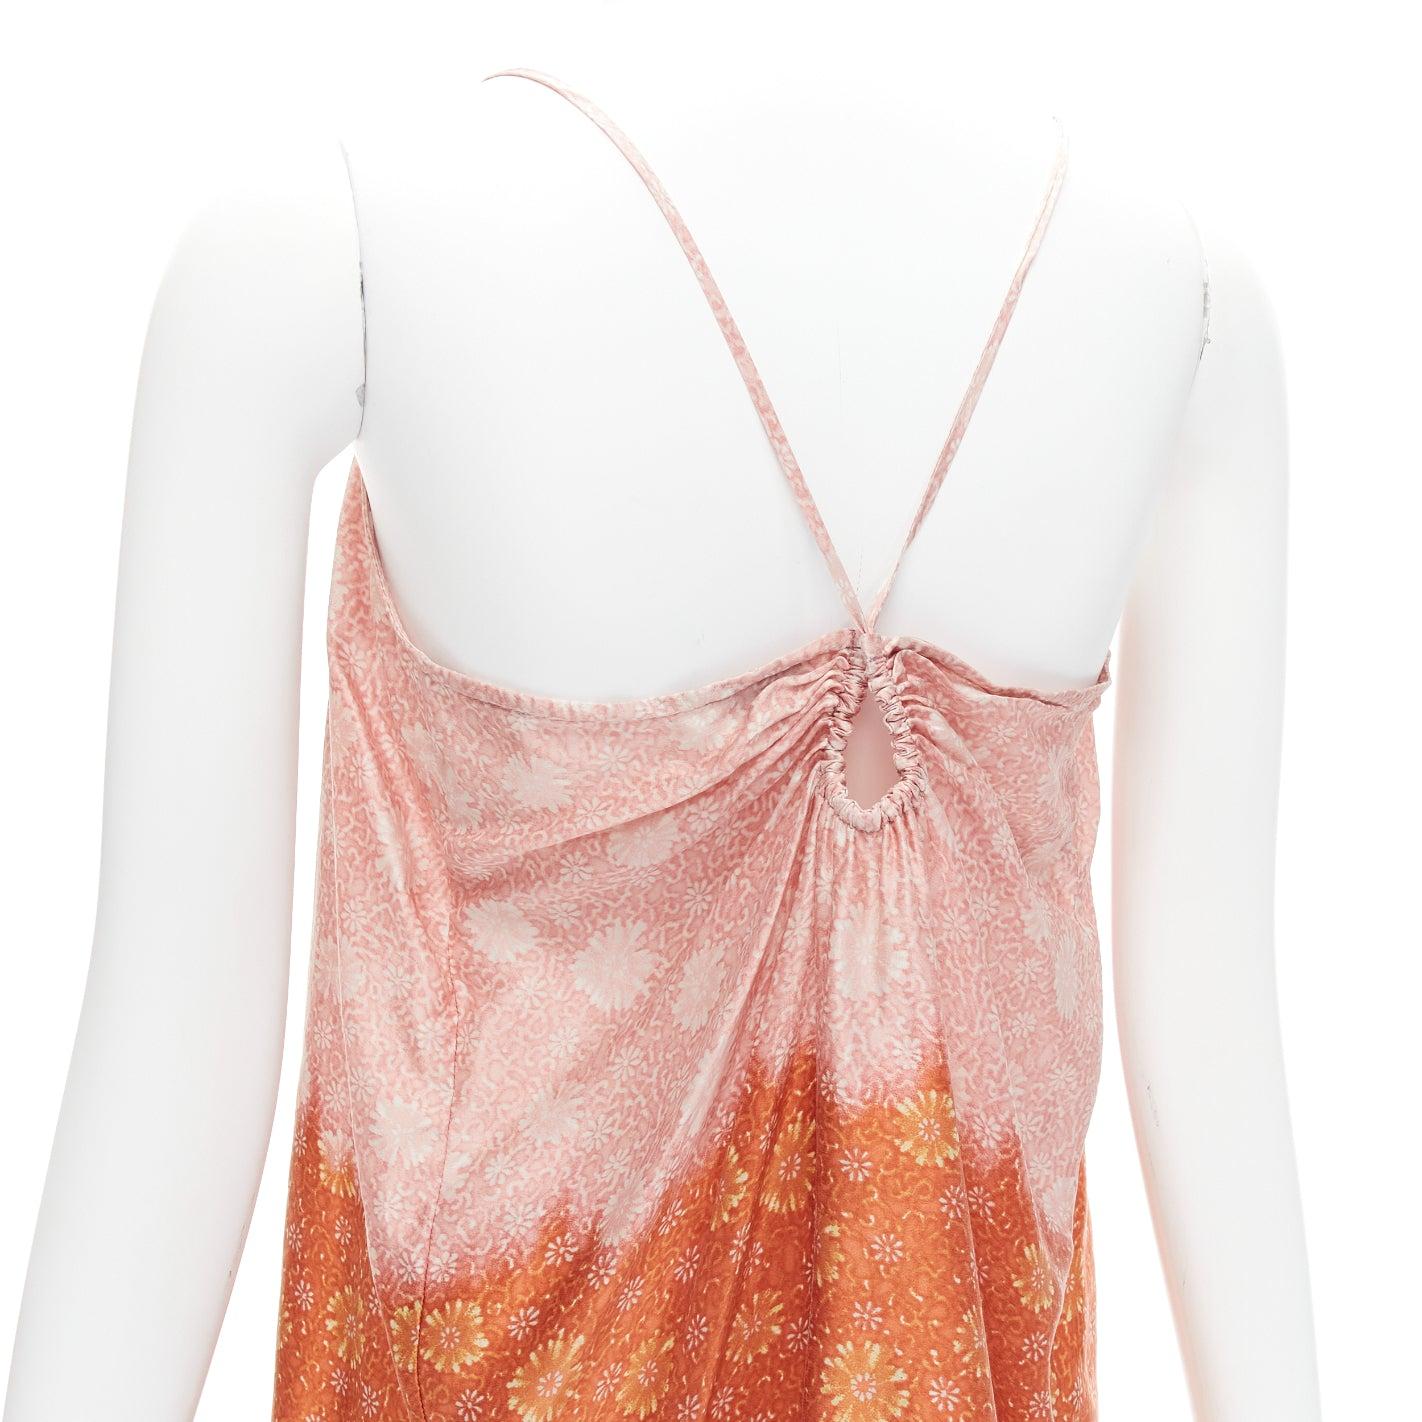 DRIES VAN NOTEN 100% silk pink brown floral dip dye slip vest top M
Reference: CELG/A00307
Brand: Dries Van Noten
Material: Silk
Color: Pink, Brown
Pattern: Floral
Closure: Slip On
Extra Details: Criss cross back.
Made in: